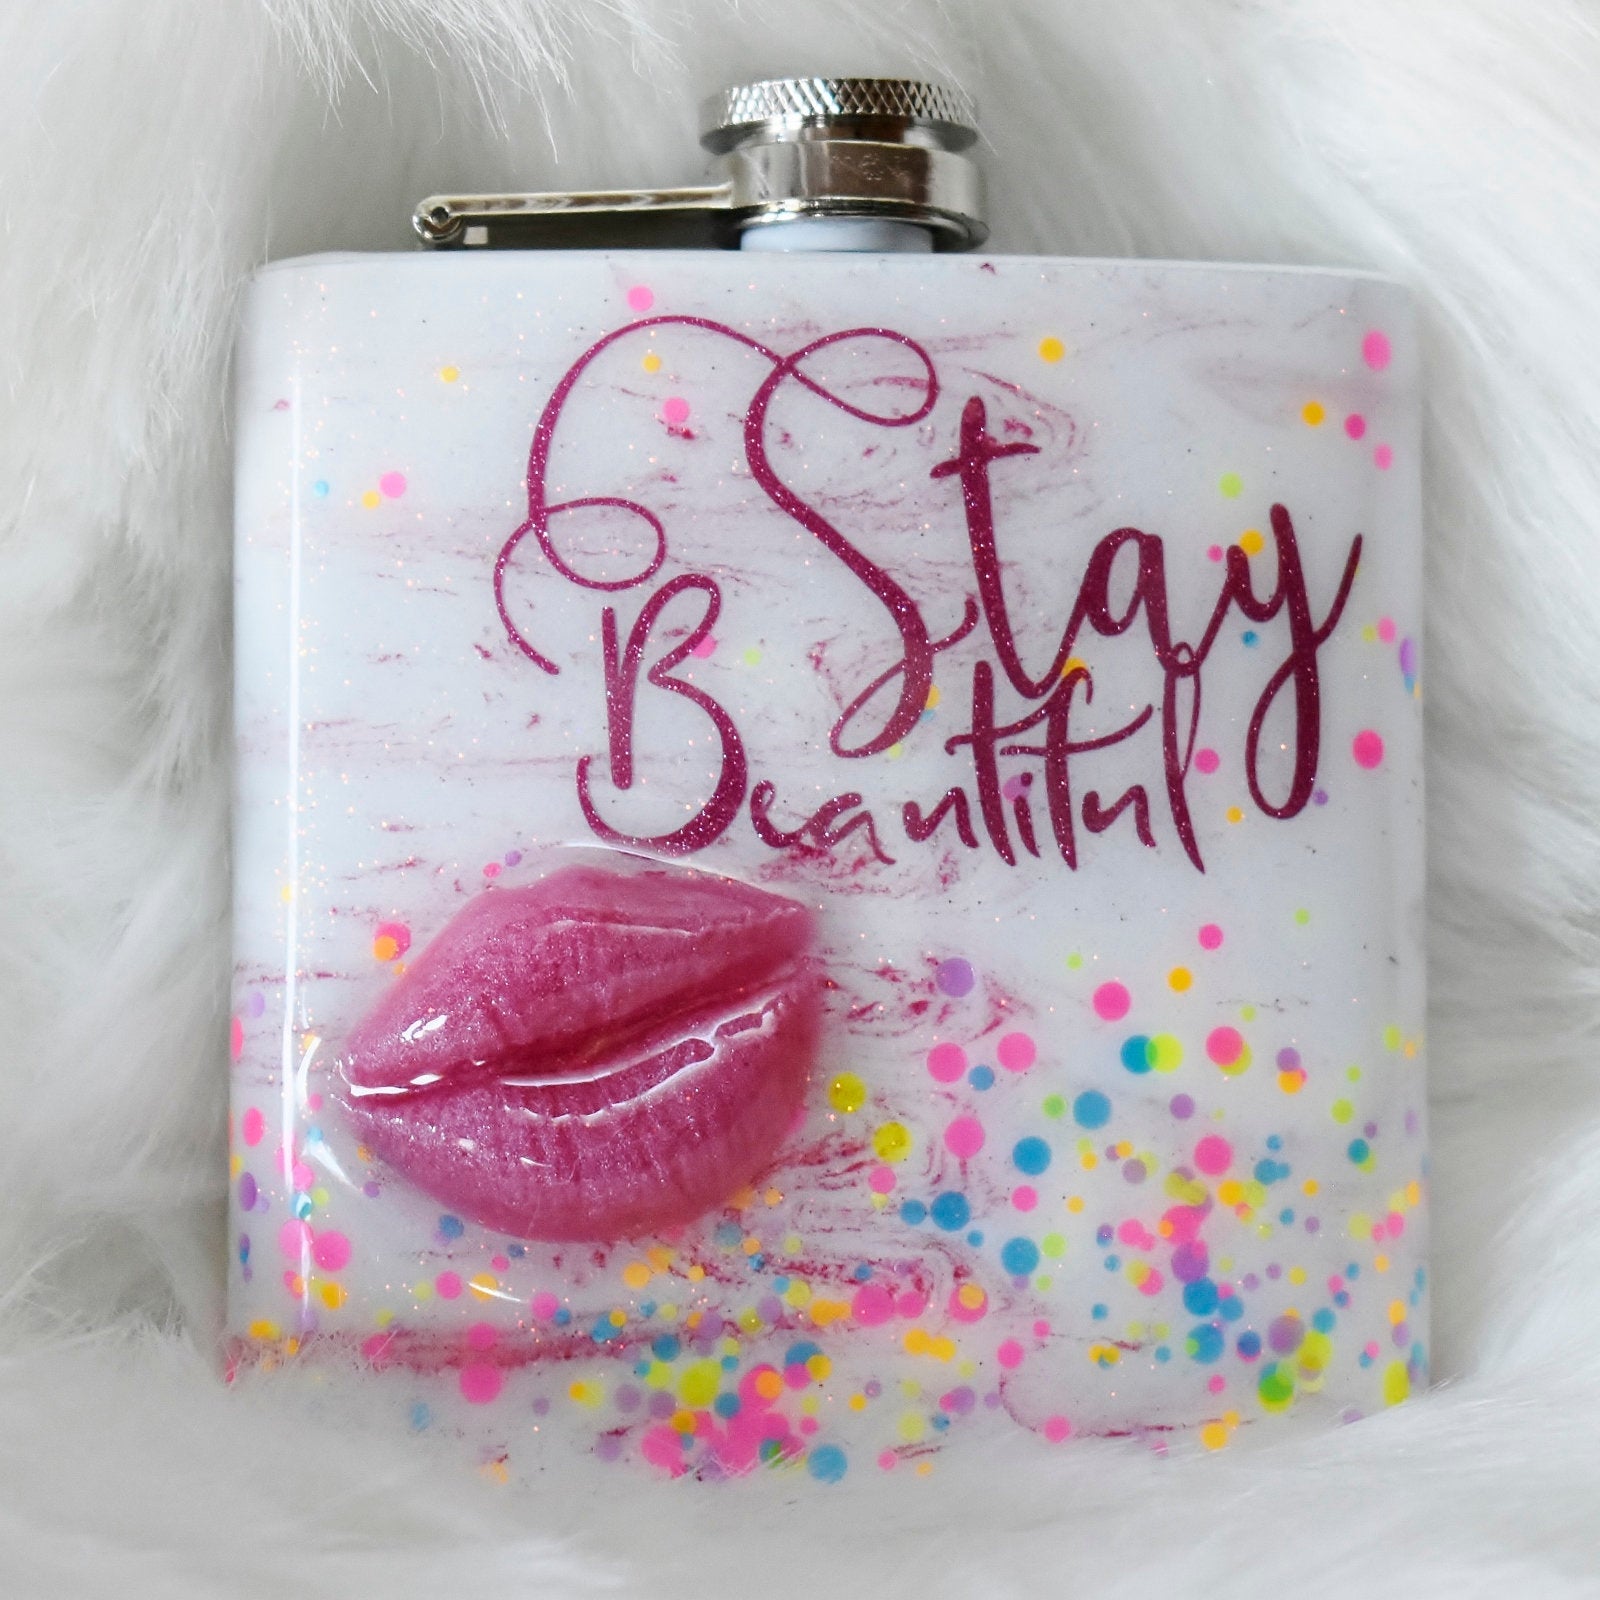 RTS Artistic Stay Beautiful Lips Design 6 oz Glitter Flask | Birthday Gift for Her  | Gift for Bride to Be | Girlfriend Gift | Bachelorette